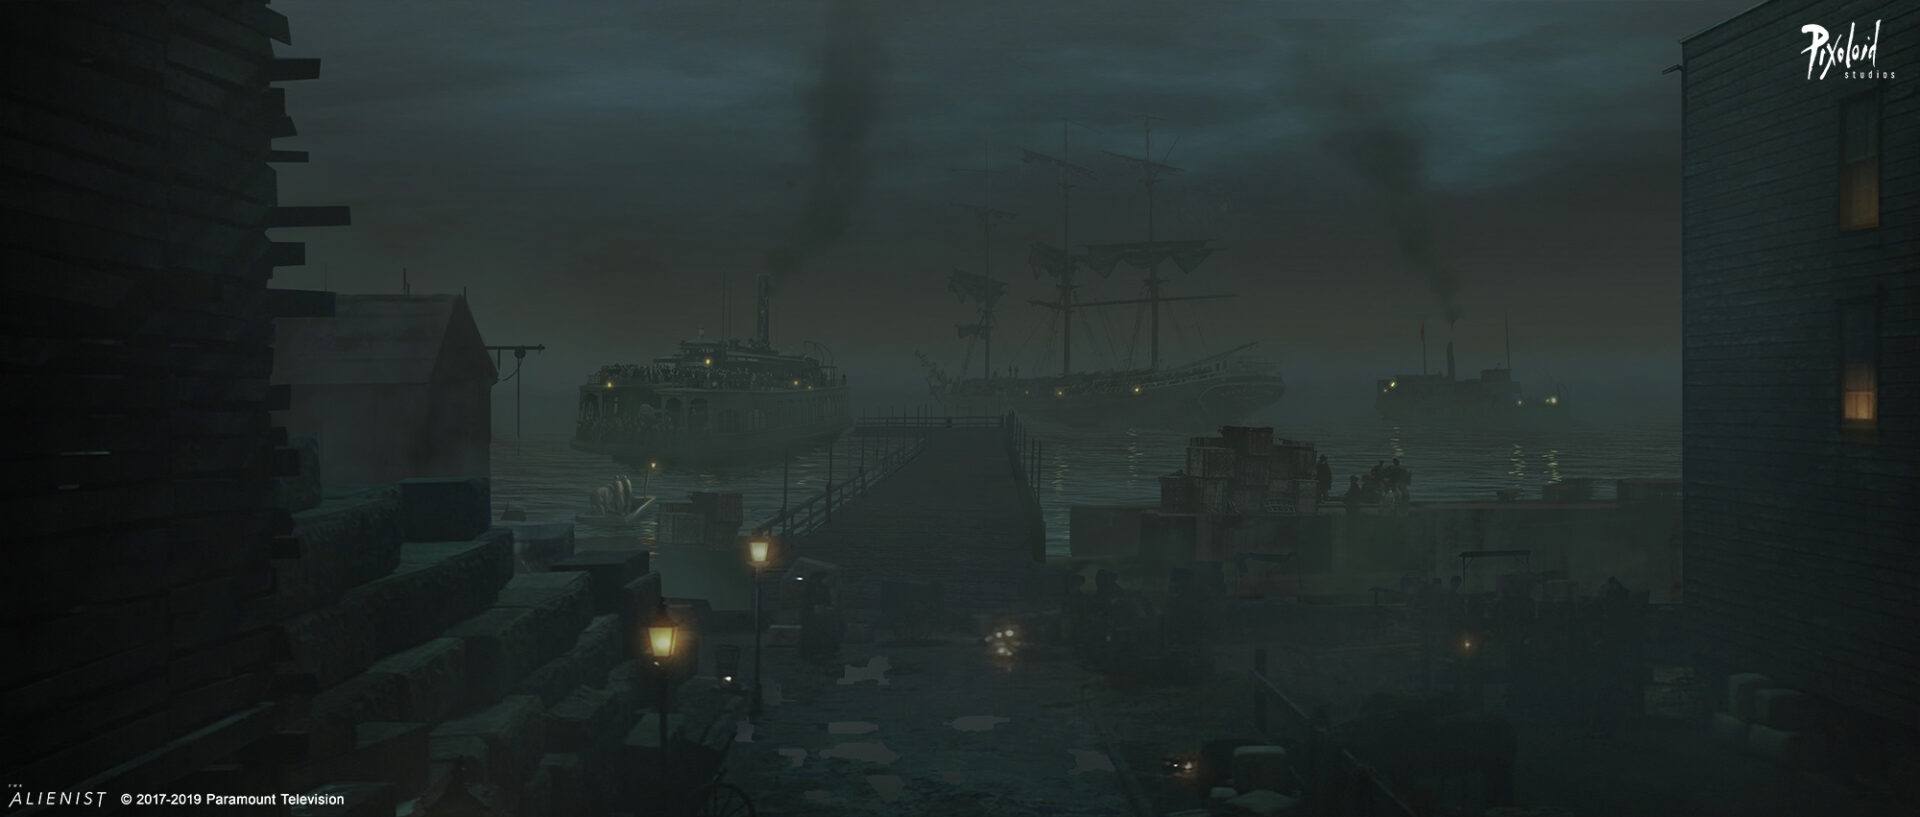 Concept art for The Alienist - Harbor at night, steam ships